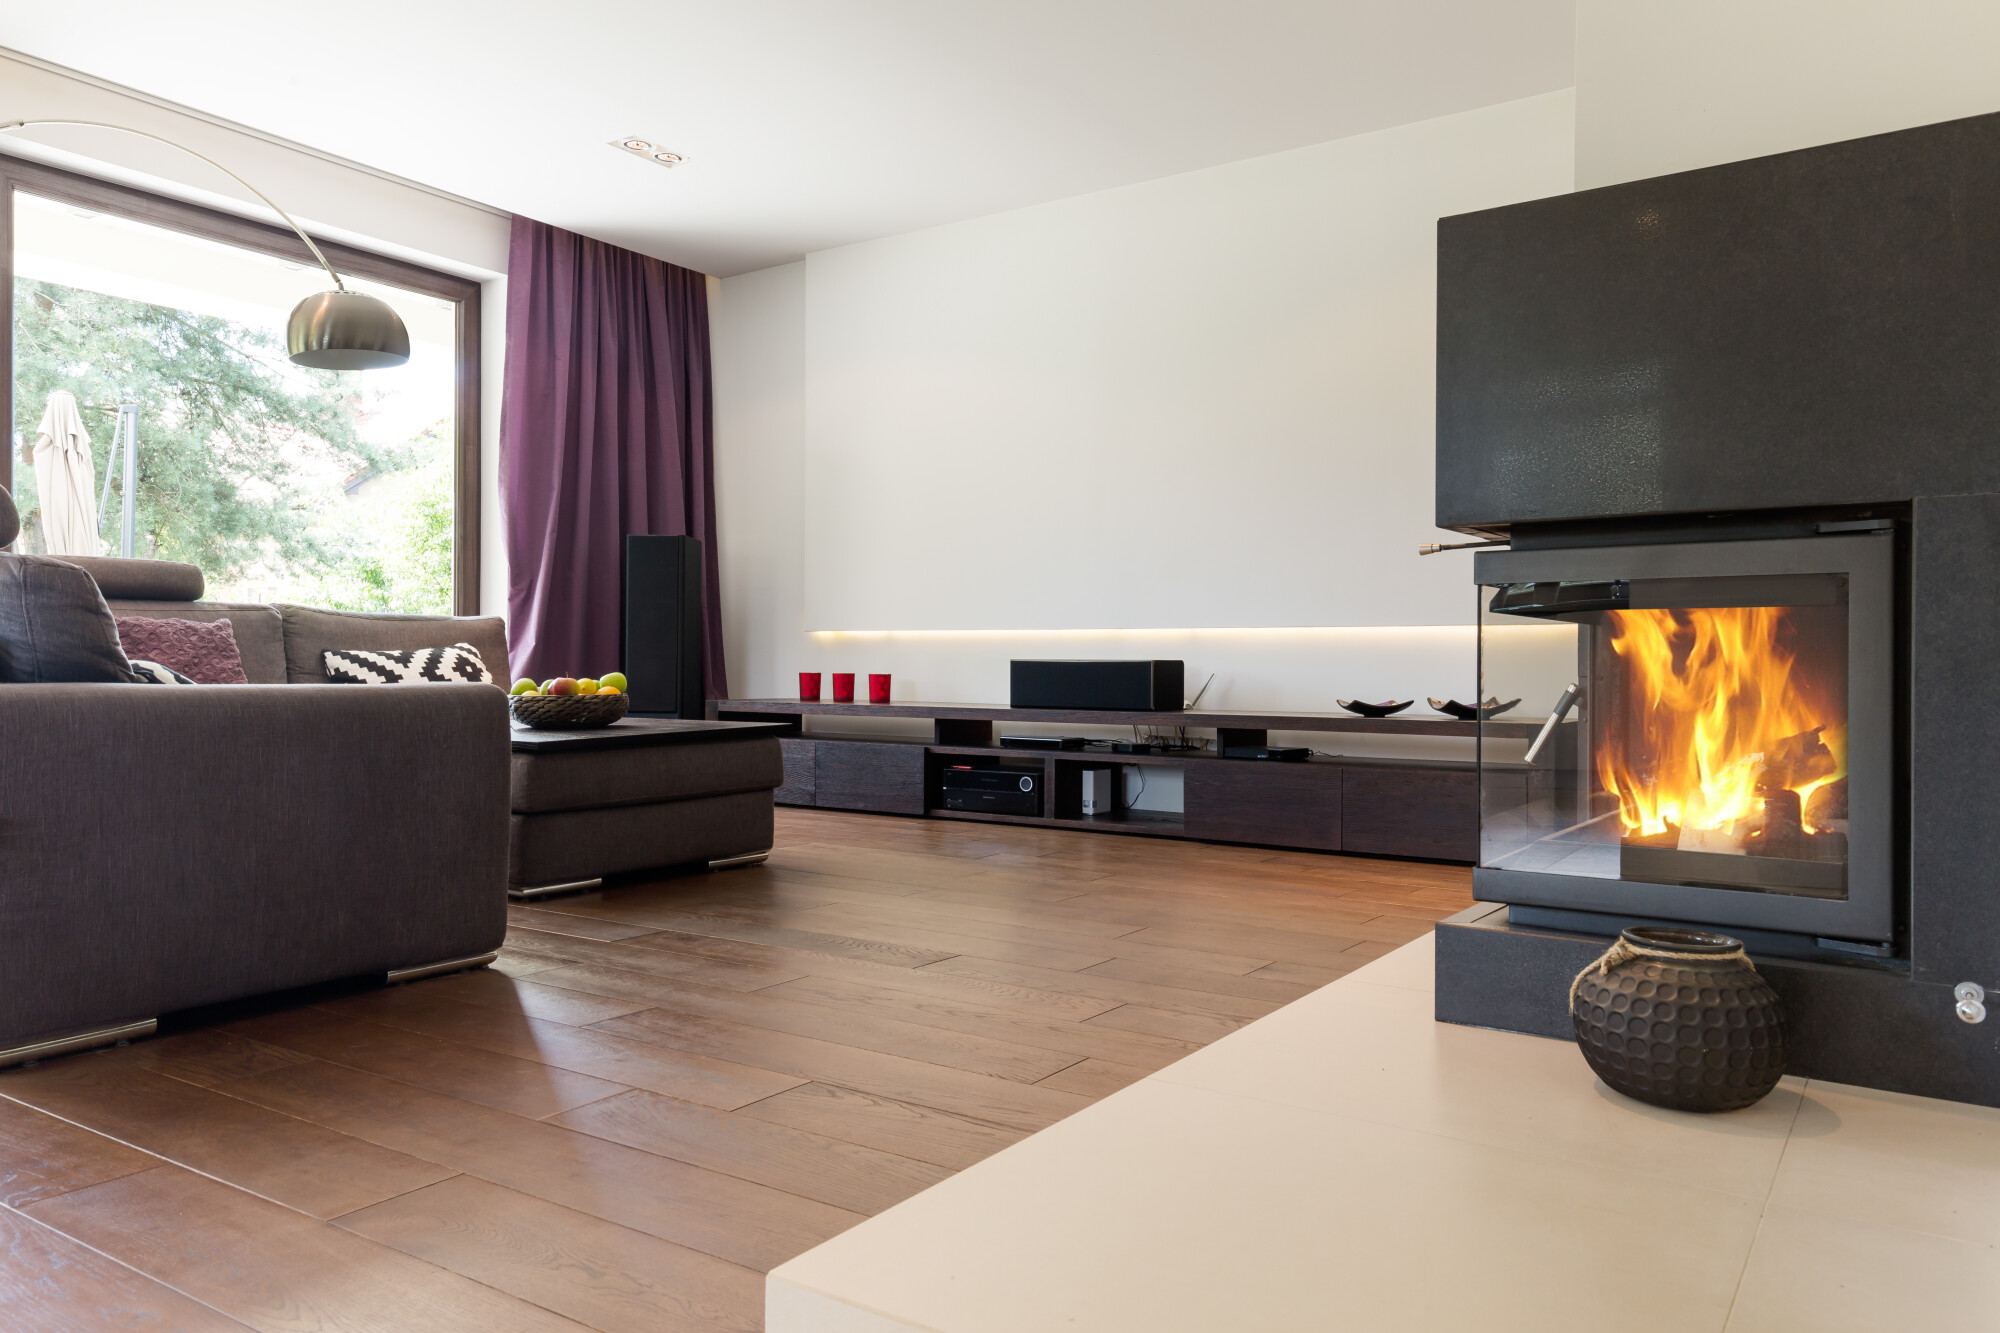 Wood vs gas fireplace: How much do you know about the differences between the two? Read on to learn more about the differences between them.